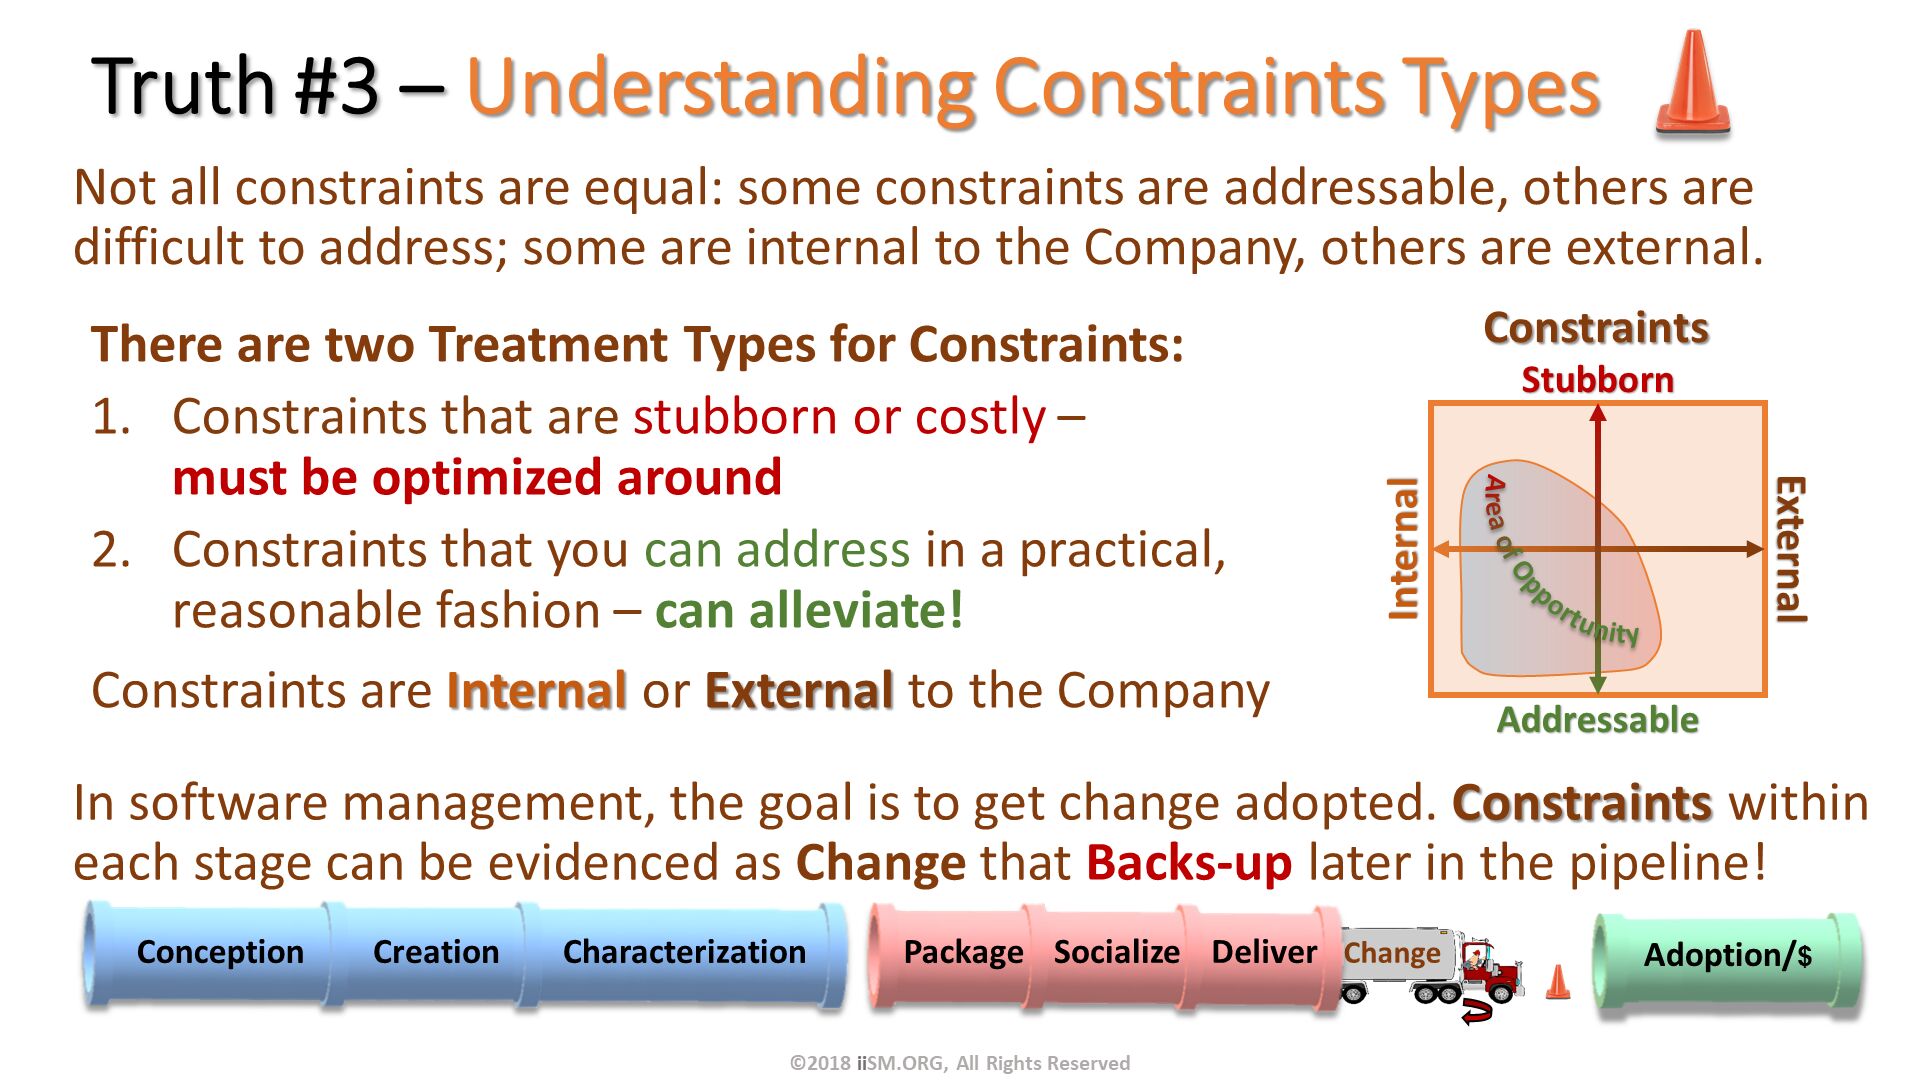 Stubborn. Addressable. Internal. External. Area of Opportunity. Truth #3 – Understanding Constraints Types. Not all constraints are equal: some constraints are addressable, others are difficult to address; some are internal to the Company, others are external. There are two Treatment Types for Constraints:
Constraints that are stubborn or costly –must be optimized around
Constraints that you can address in a practical, reasonable fashion – can alleviate!
Constraints are Internal or External to the Company. In software management, the goal is to get change adopted. Constraints within each stage can be evidenced as Change that Backs-up later in the pipeline!
. Constraints. ©2018 iiSM.ORG, All Rights Reserved. 